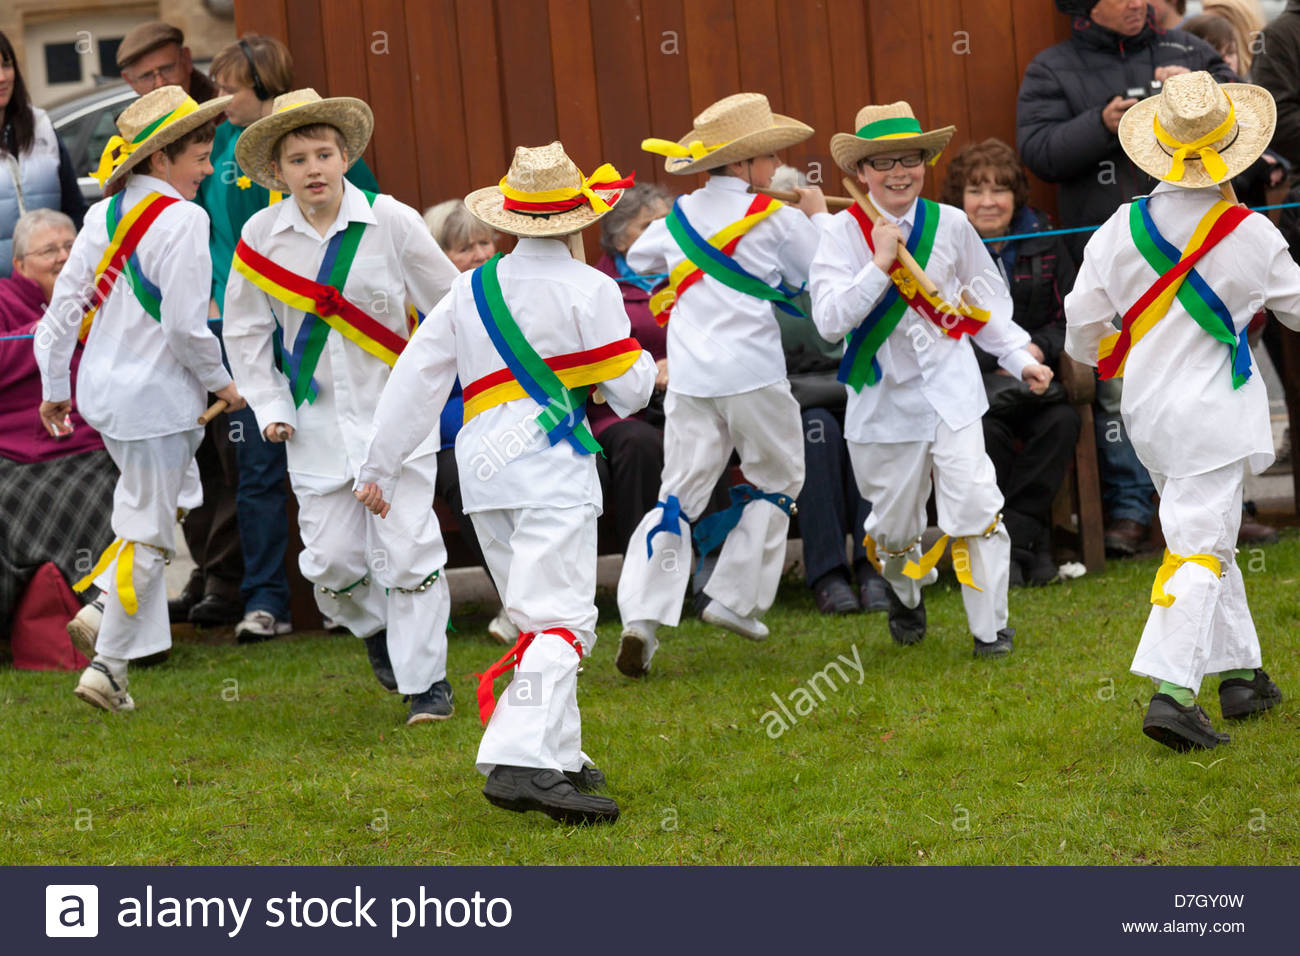 children-morris-dancing-at-may-day-festival-long-preston-north-yorkshire-D7GY0W.jpg